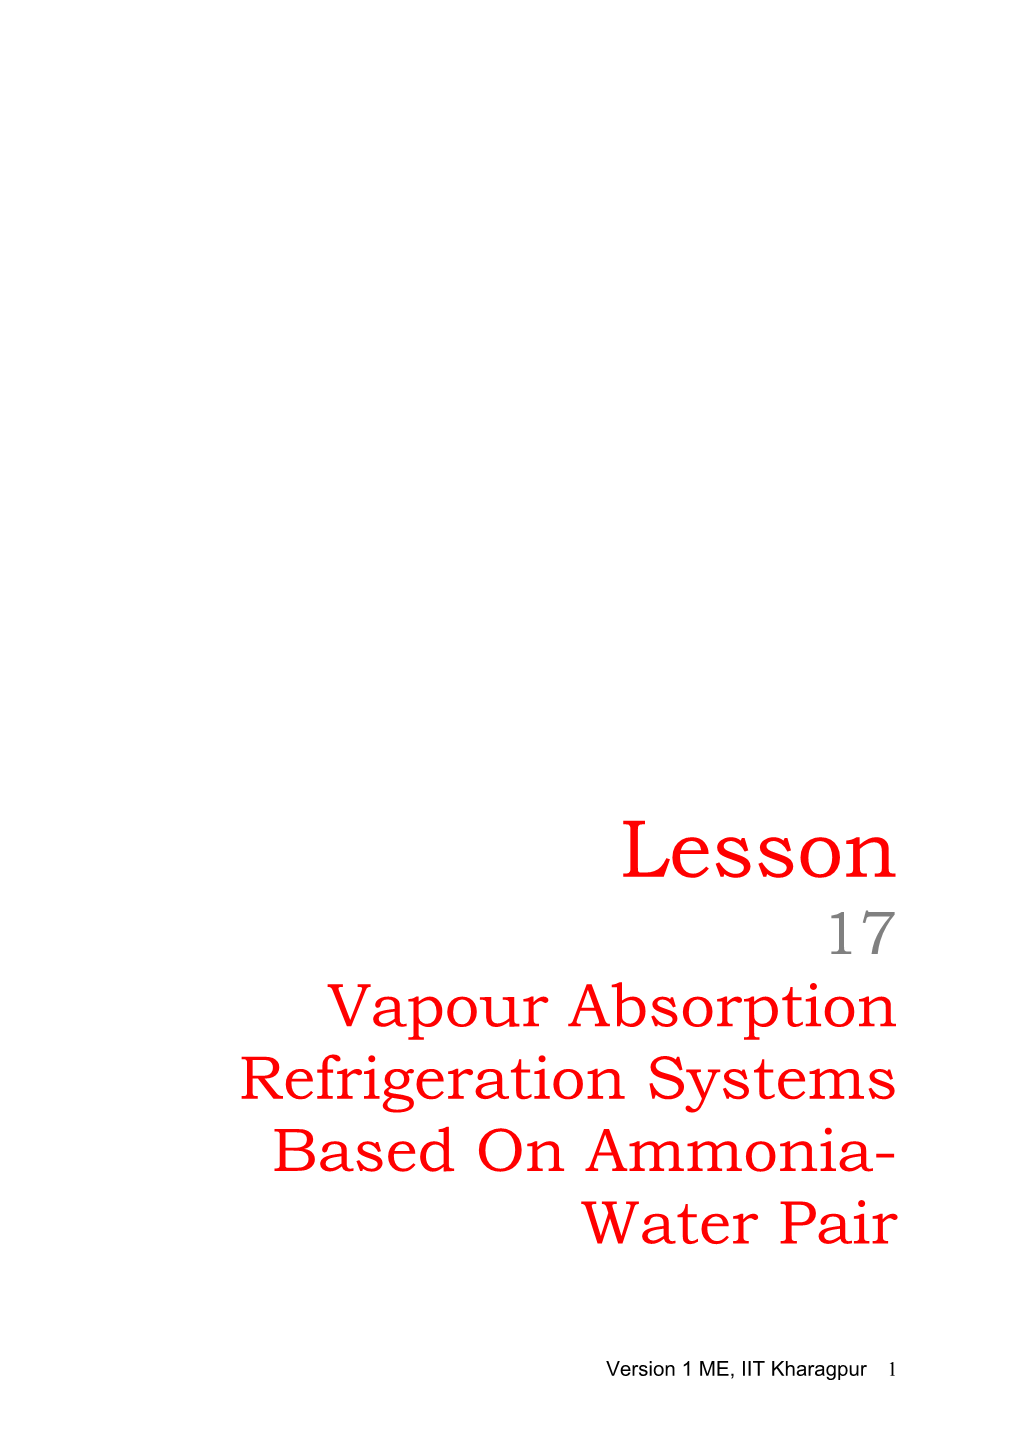 Vapour Absorption Refrigeration Systems Based on Ammonia- Water Pair